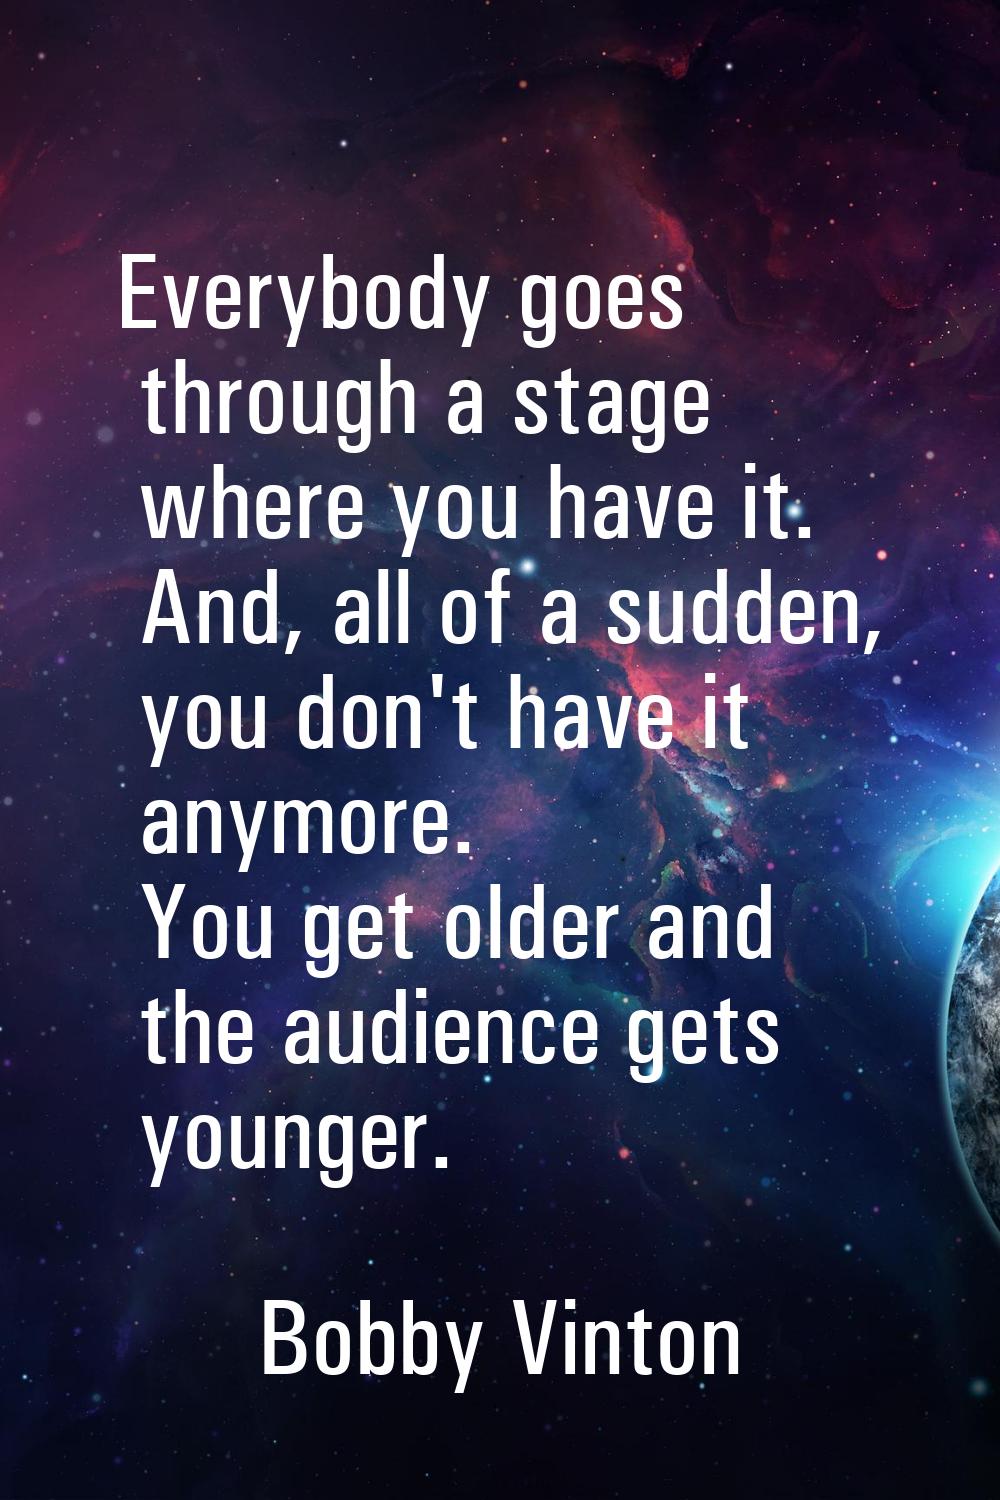 Everybody goes through a stage where you have it. And, all of a sudden, you don't have it anymore. 